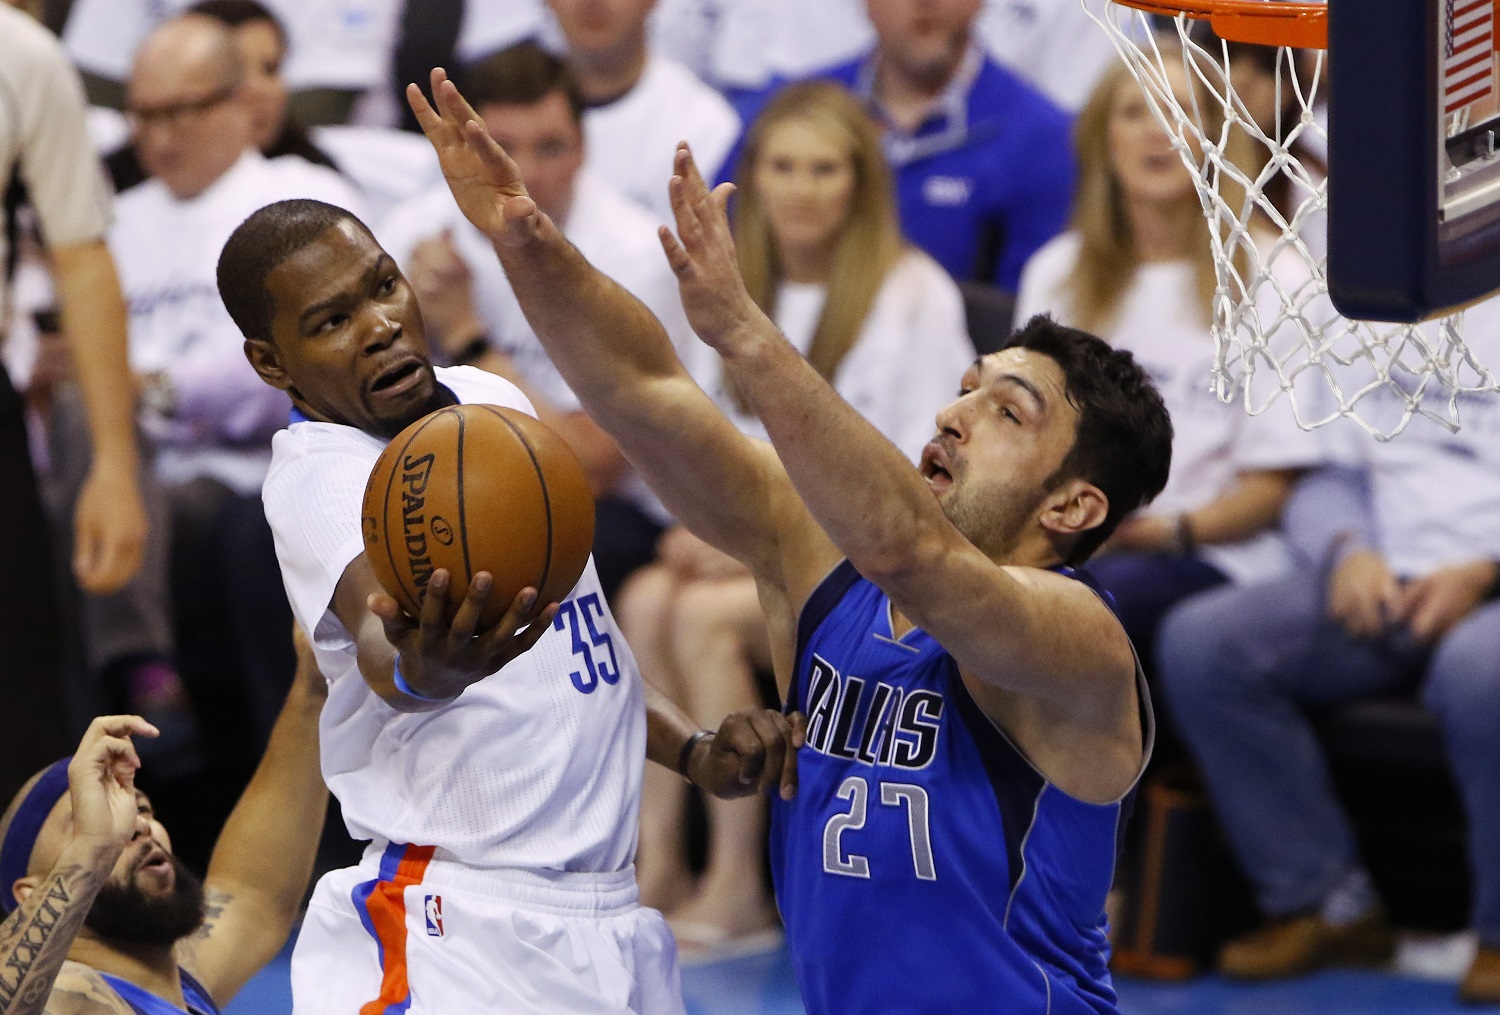 Oklahoma City Thunder forward Kevin Durant (35) goes to the basket as Dallas Mavericks center Zaza Pachulia (27) defends during the first half of Game 2 of a first-round NBA basketball playoff series, Monday, April 18, 2016, in Oklahoma City. (AP Photo/Alonzo Adams)